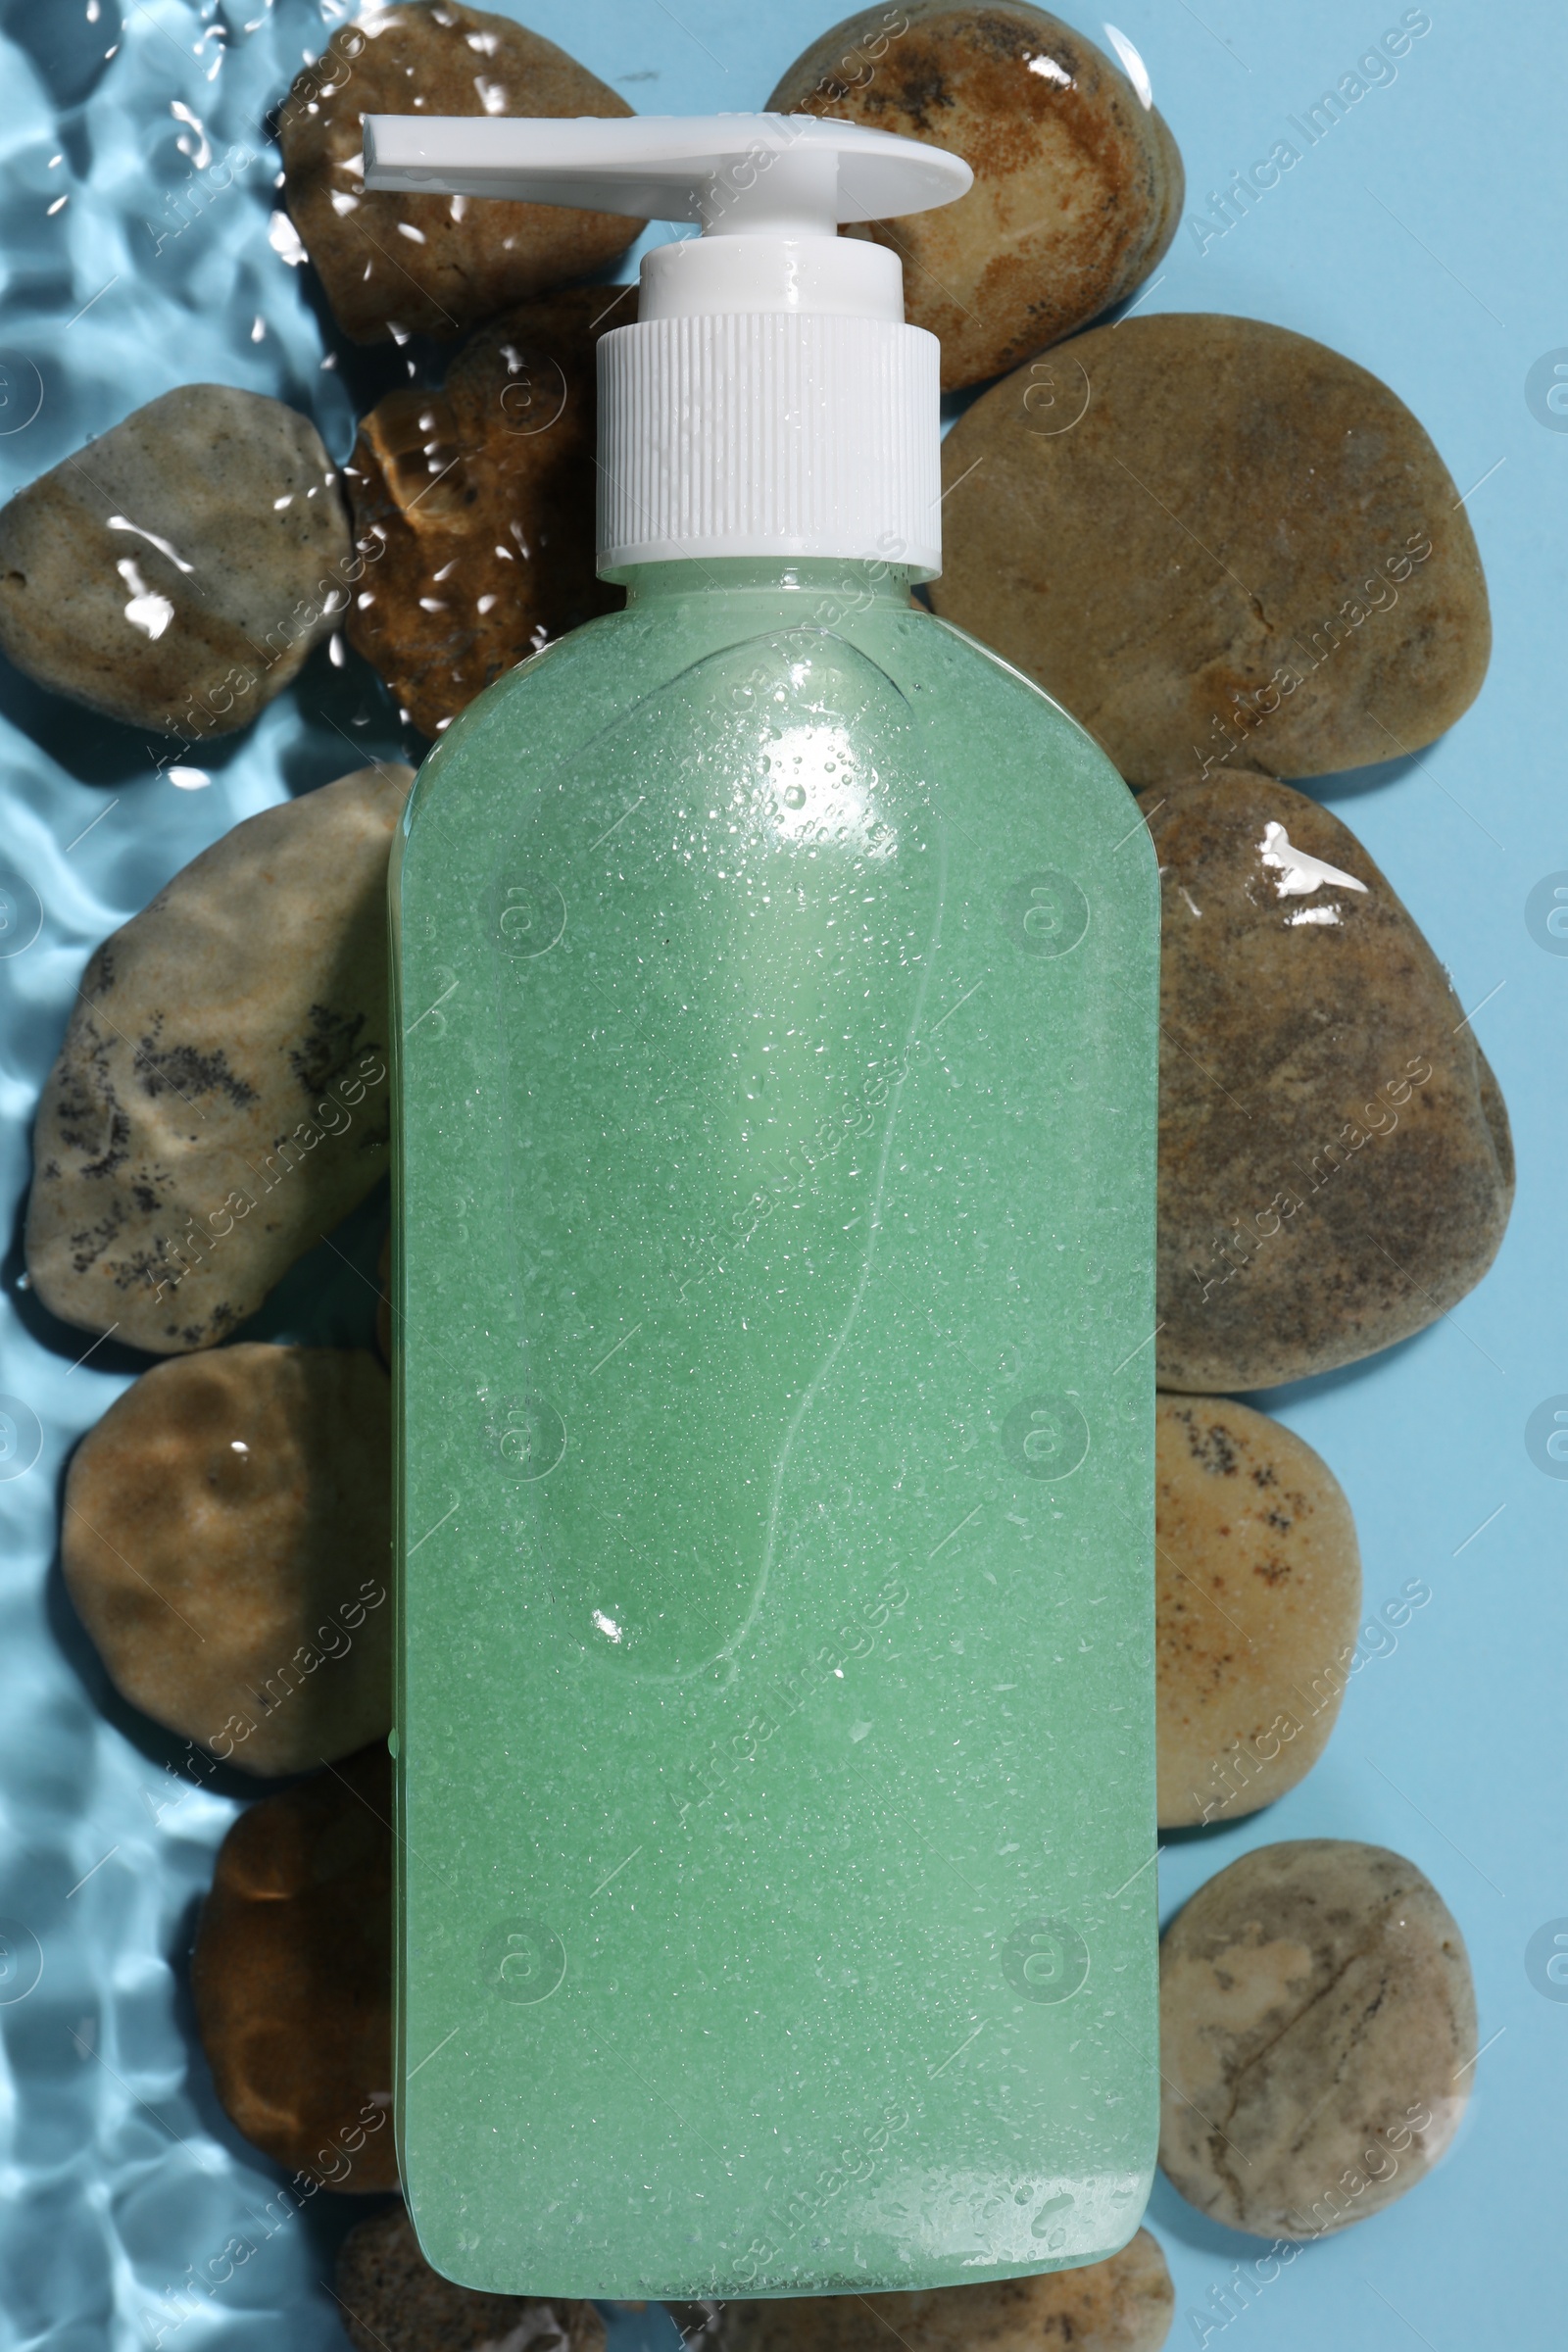 Photo of Bottle of face cleansing product and stones in water against light blue background, flat lay